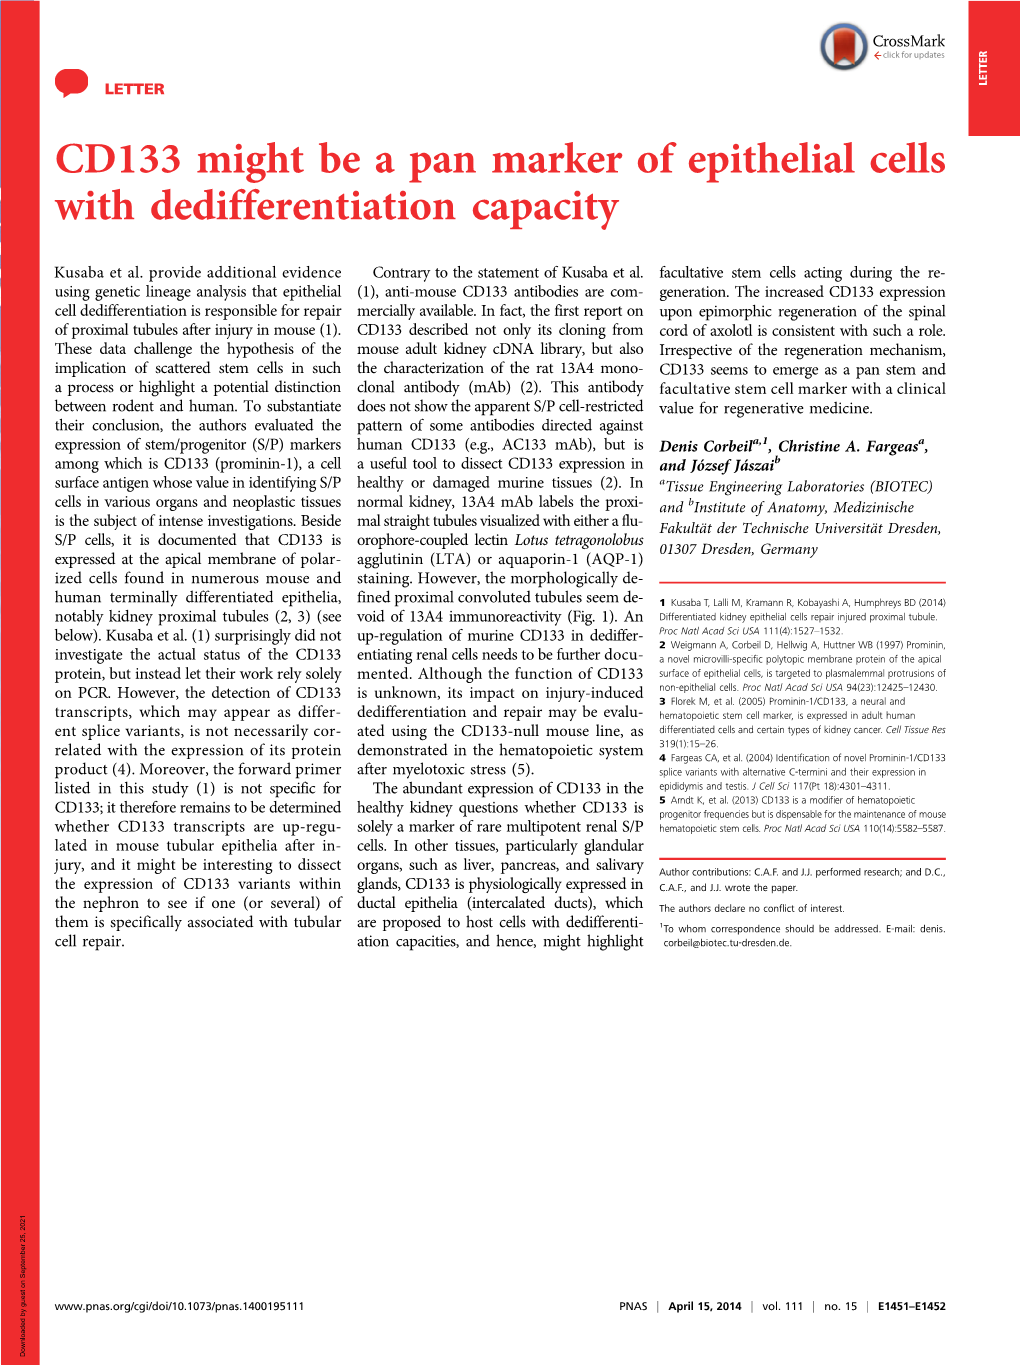 CD133 Might Be a Pan Marker of Epithelial Cells with Dedifferentiation Capacity